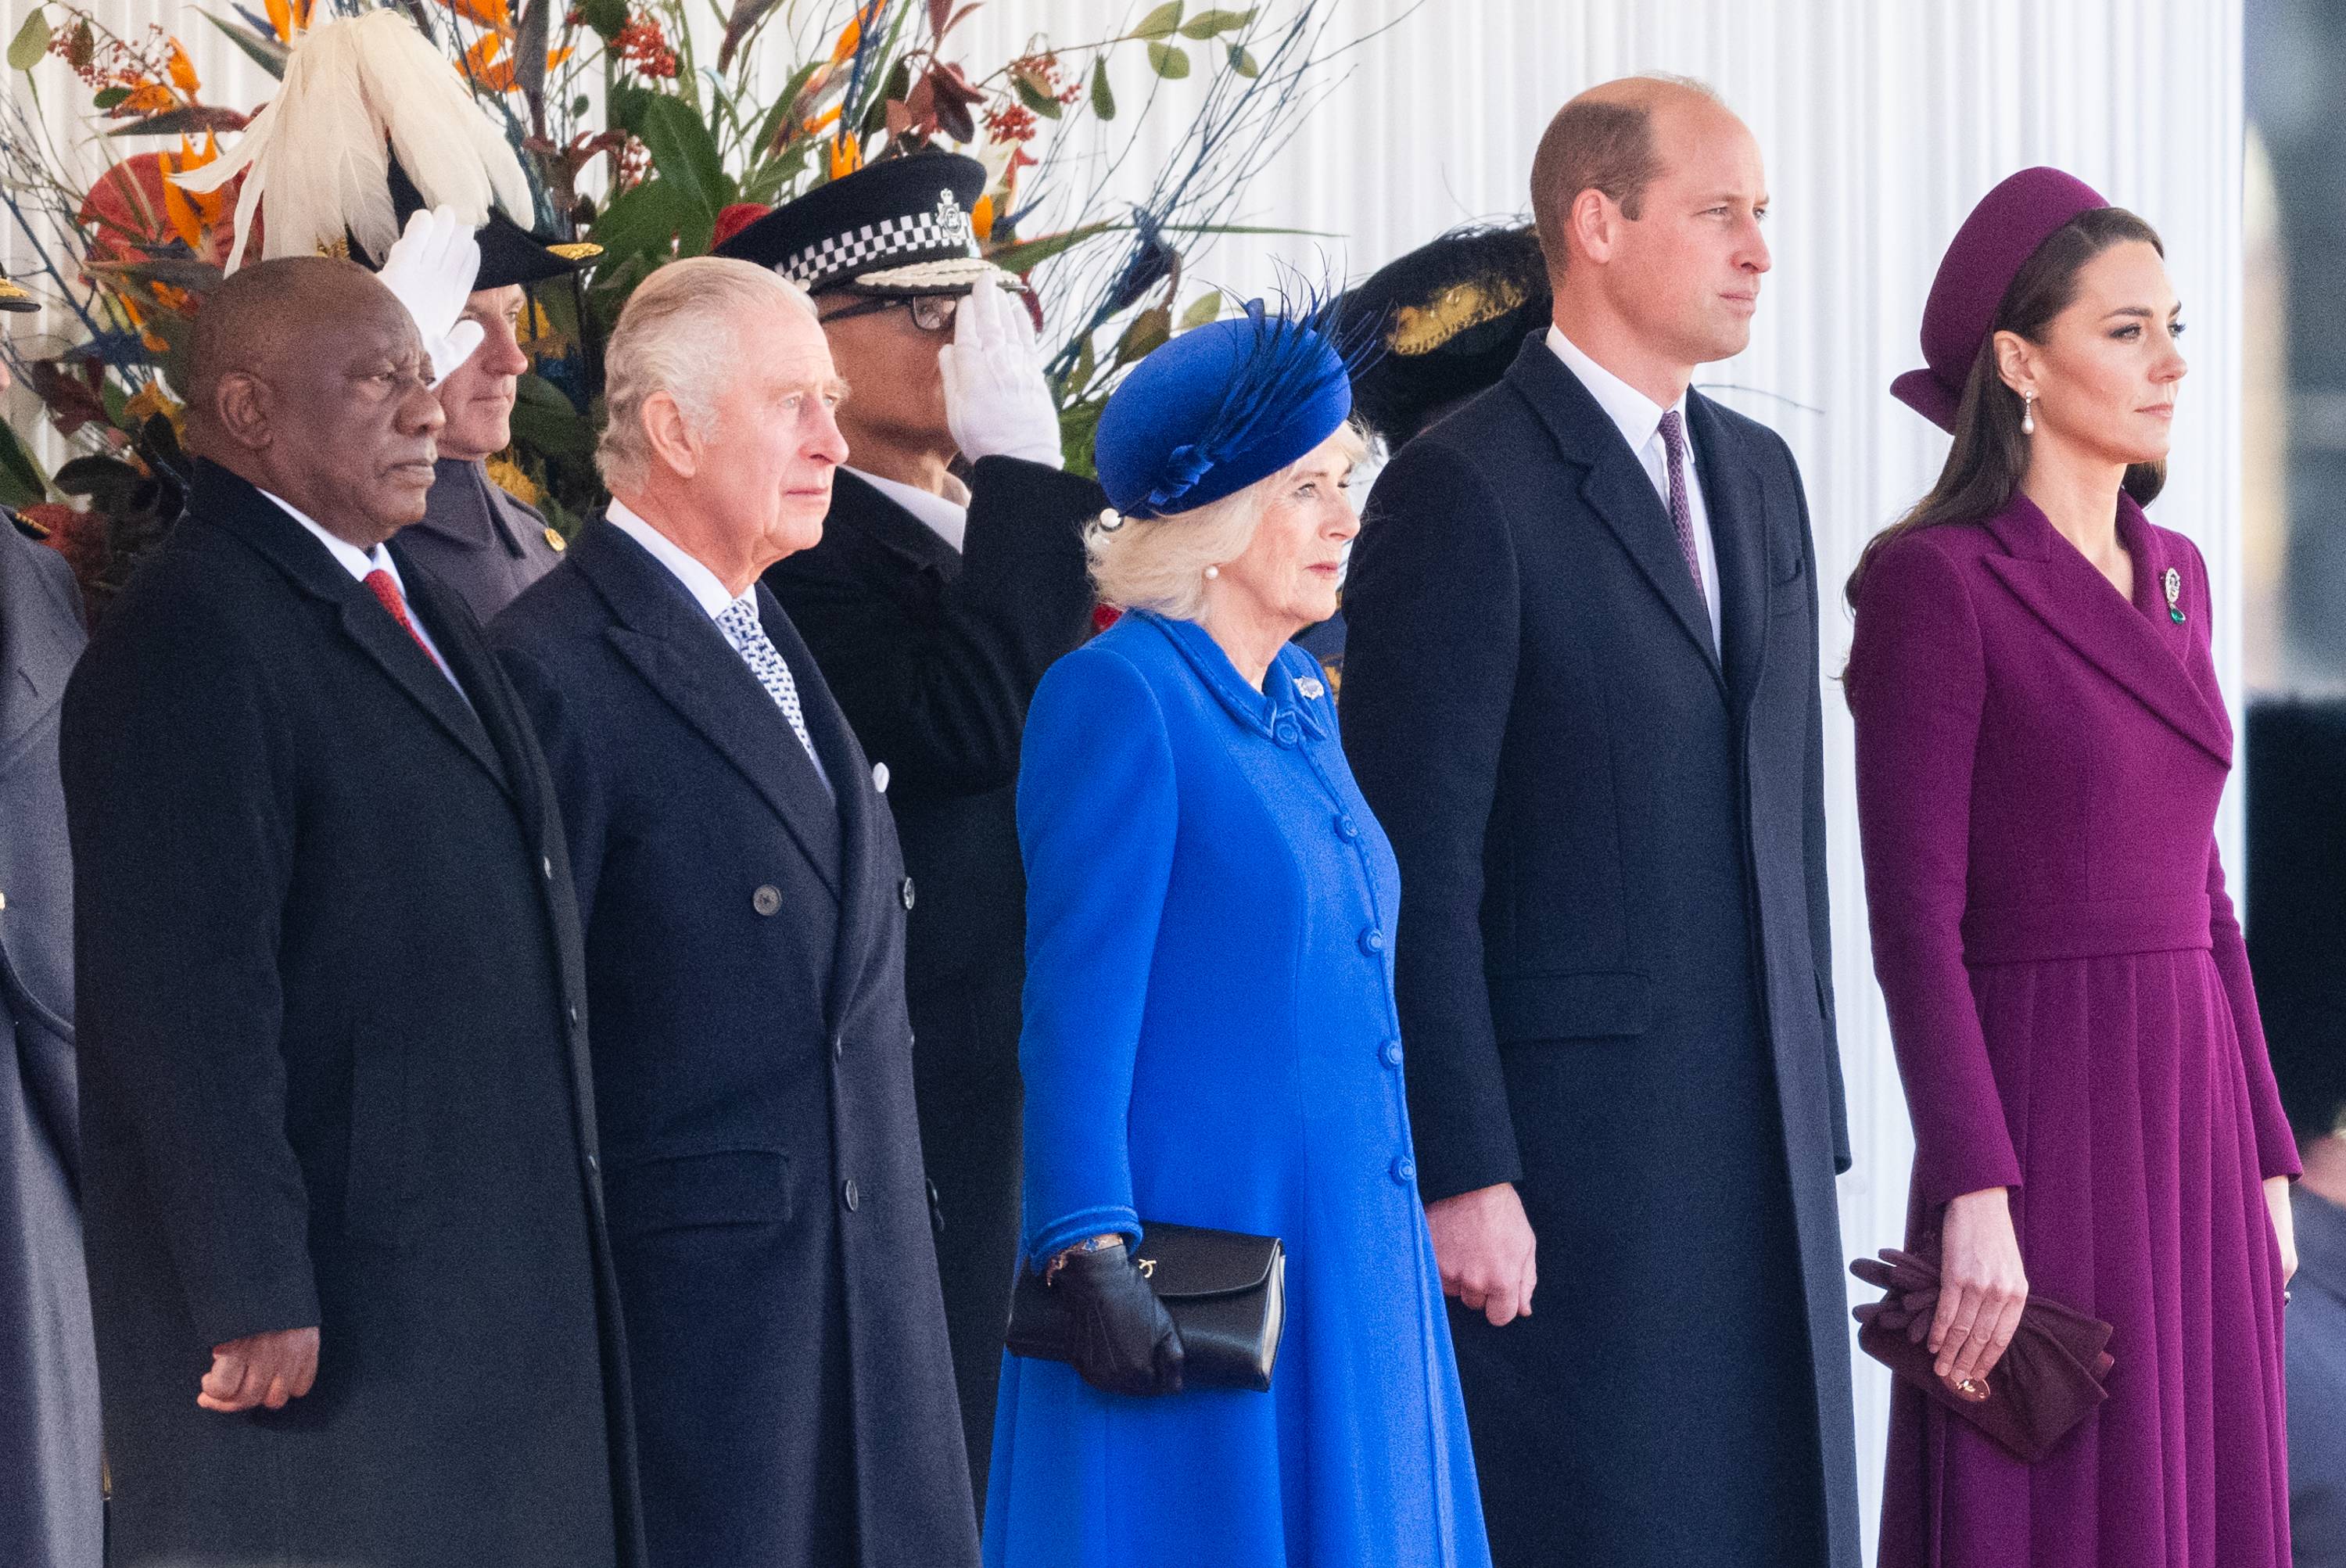 <p>President Cyril Ramaphosa of South Africa was joined by King Charles III, Queen Consort Camilla, <a href="https://www.wonderwall.com/celebrity/profiles/overview/prince-william-482.article">Prince William</a> and Princess Kate at a ceremonial welcome for the visiting leader's official state visit to Britain at Horse Guards Parade in London on Nov. 22, 2022. This was the first state visit hosted by the U.K. with Charles as monarch, and the first state visit to Britain by a South African leader since 2010.</p>